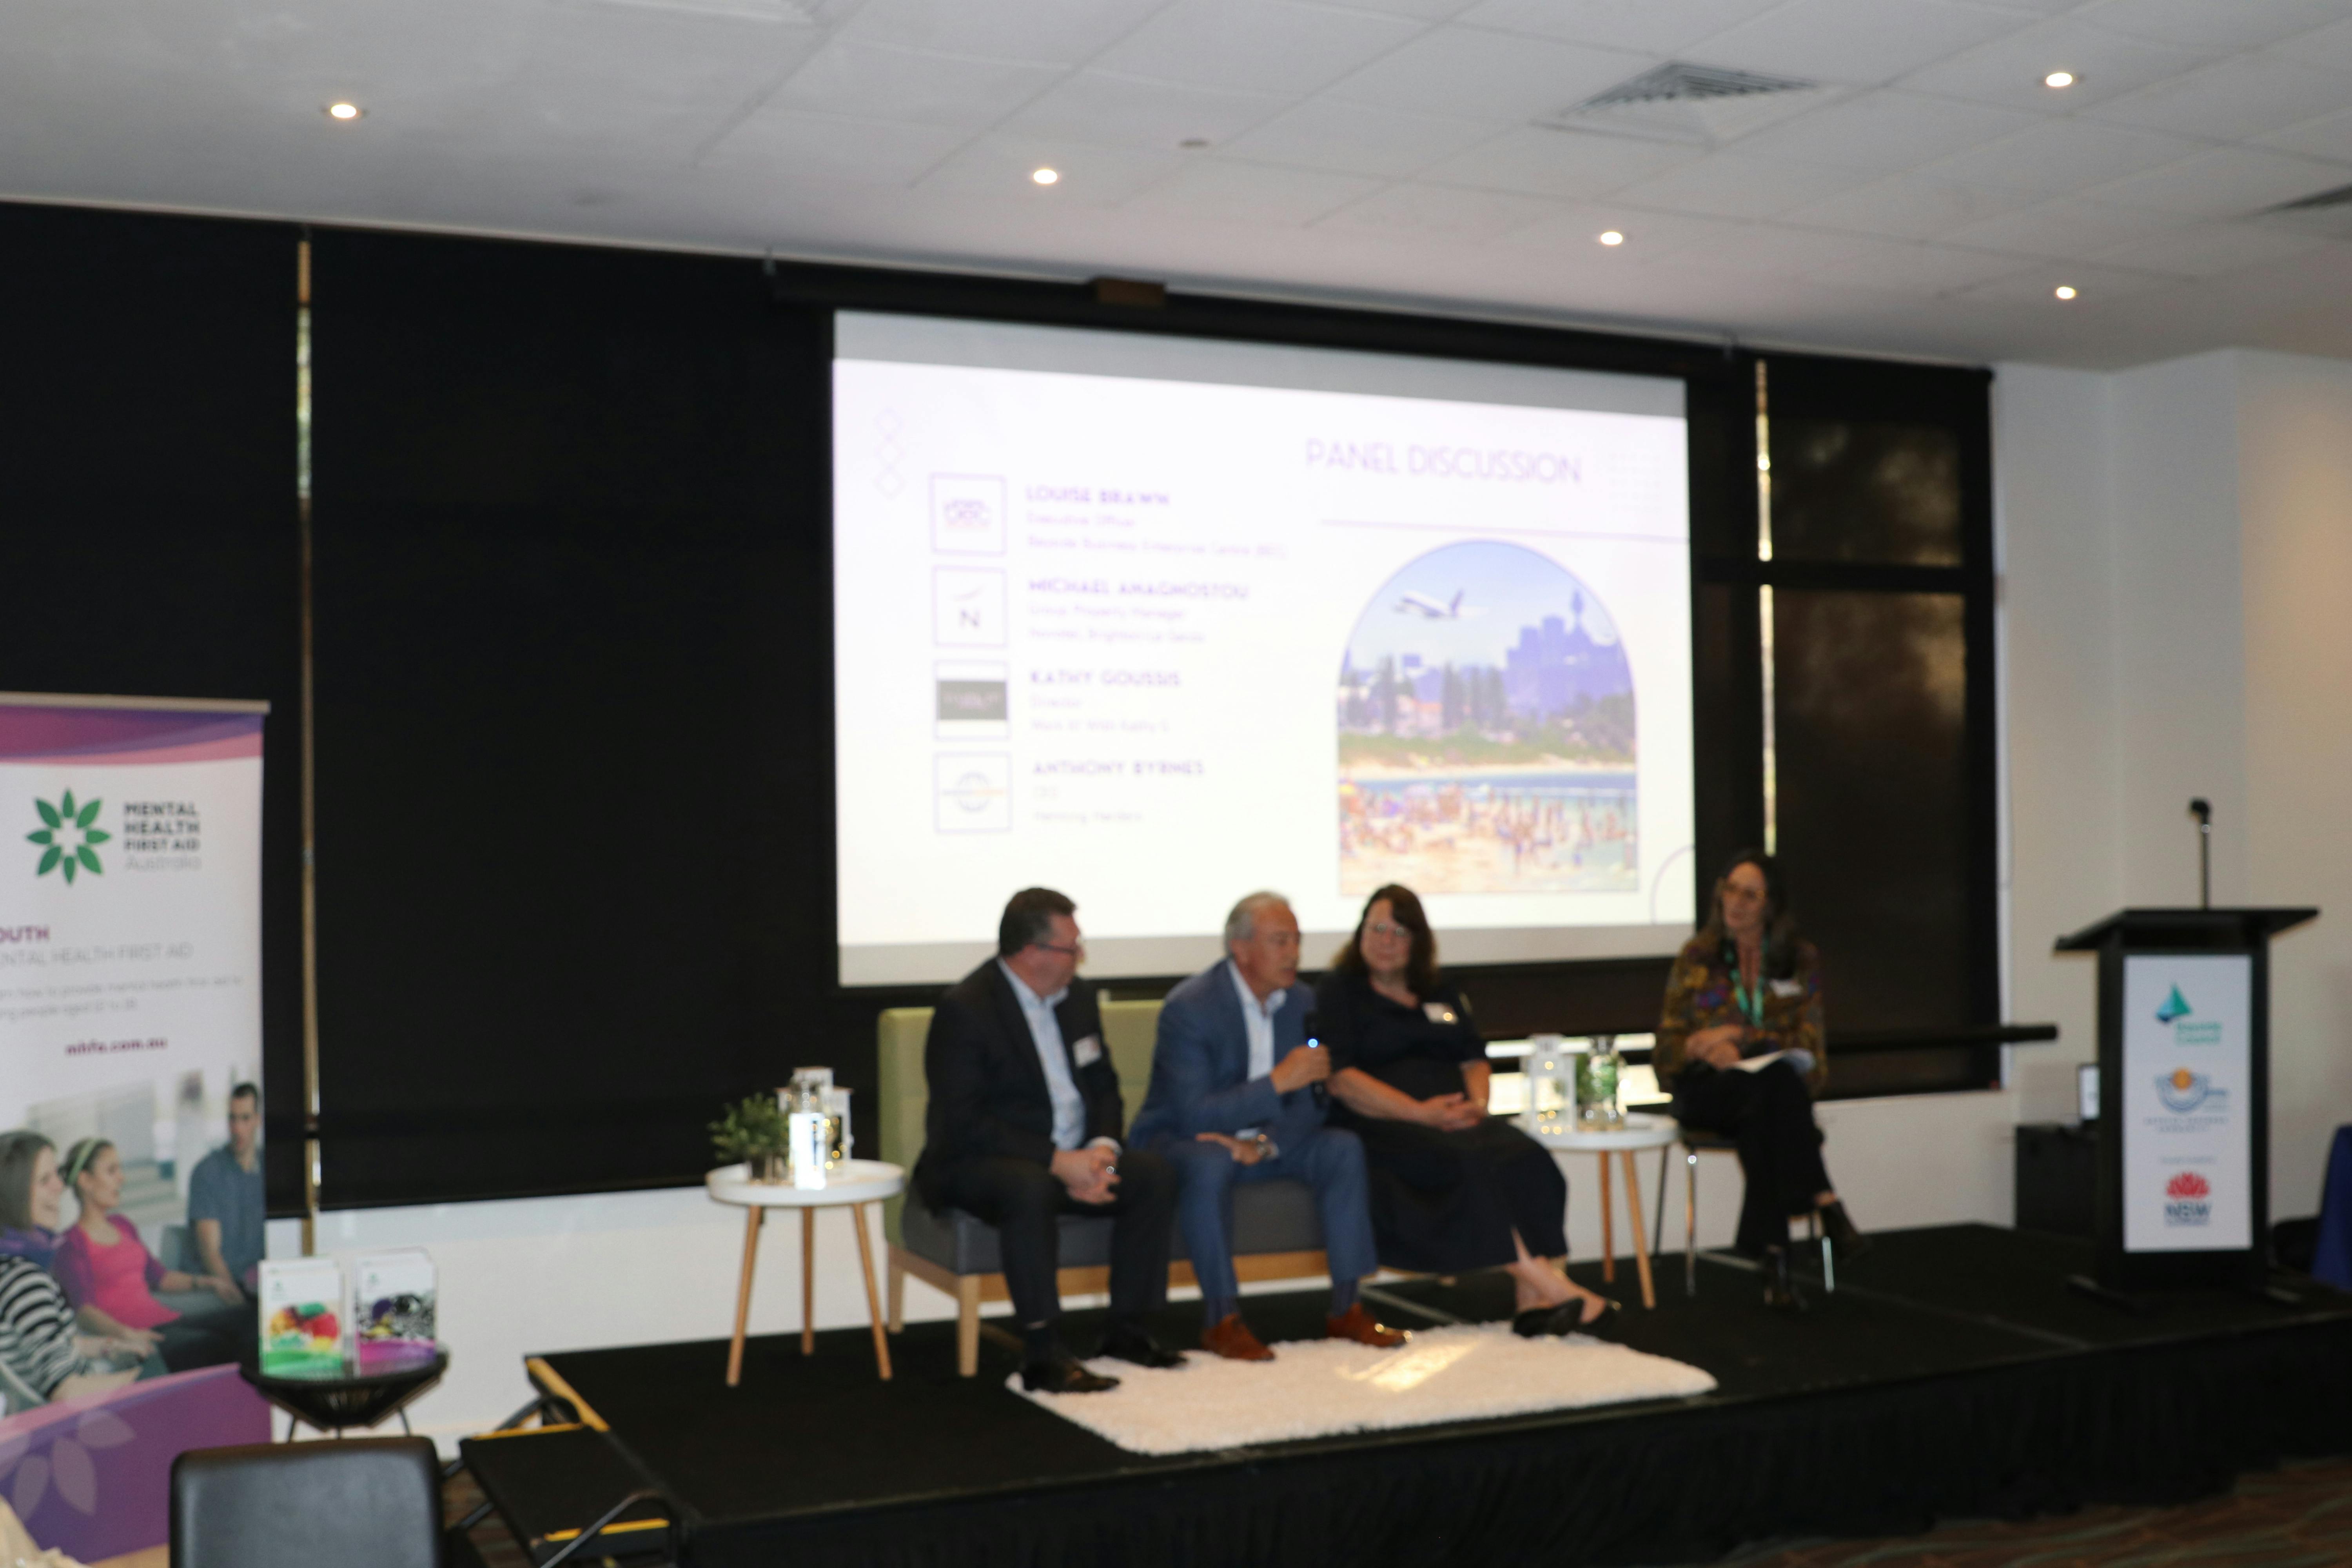 Well-Being of Bayside Business Event Panel Discussion 10 November 2022